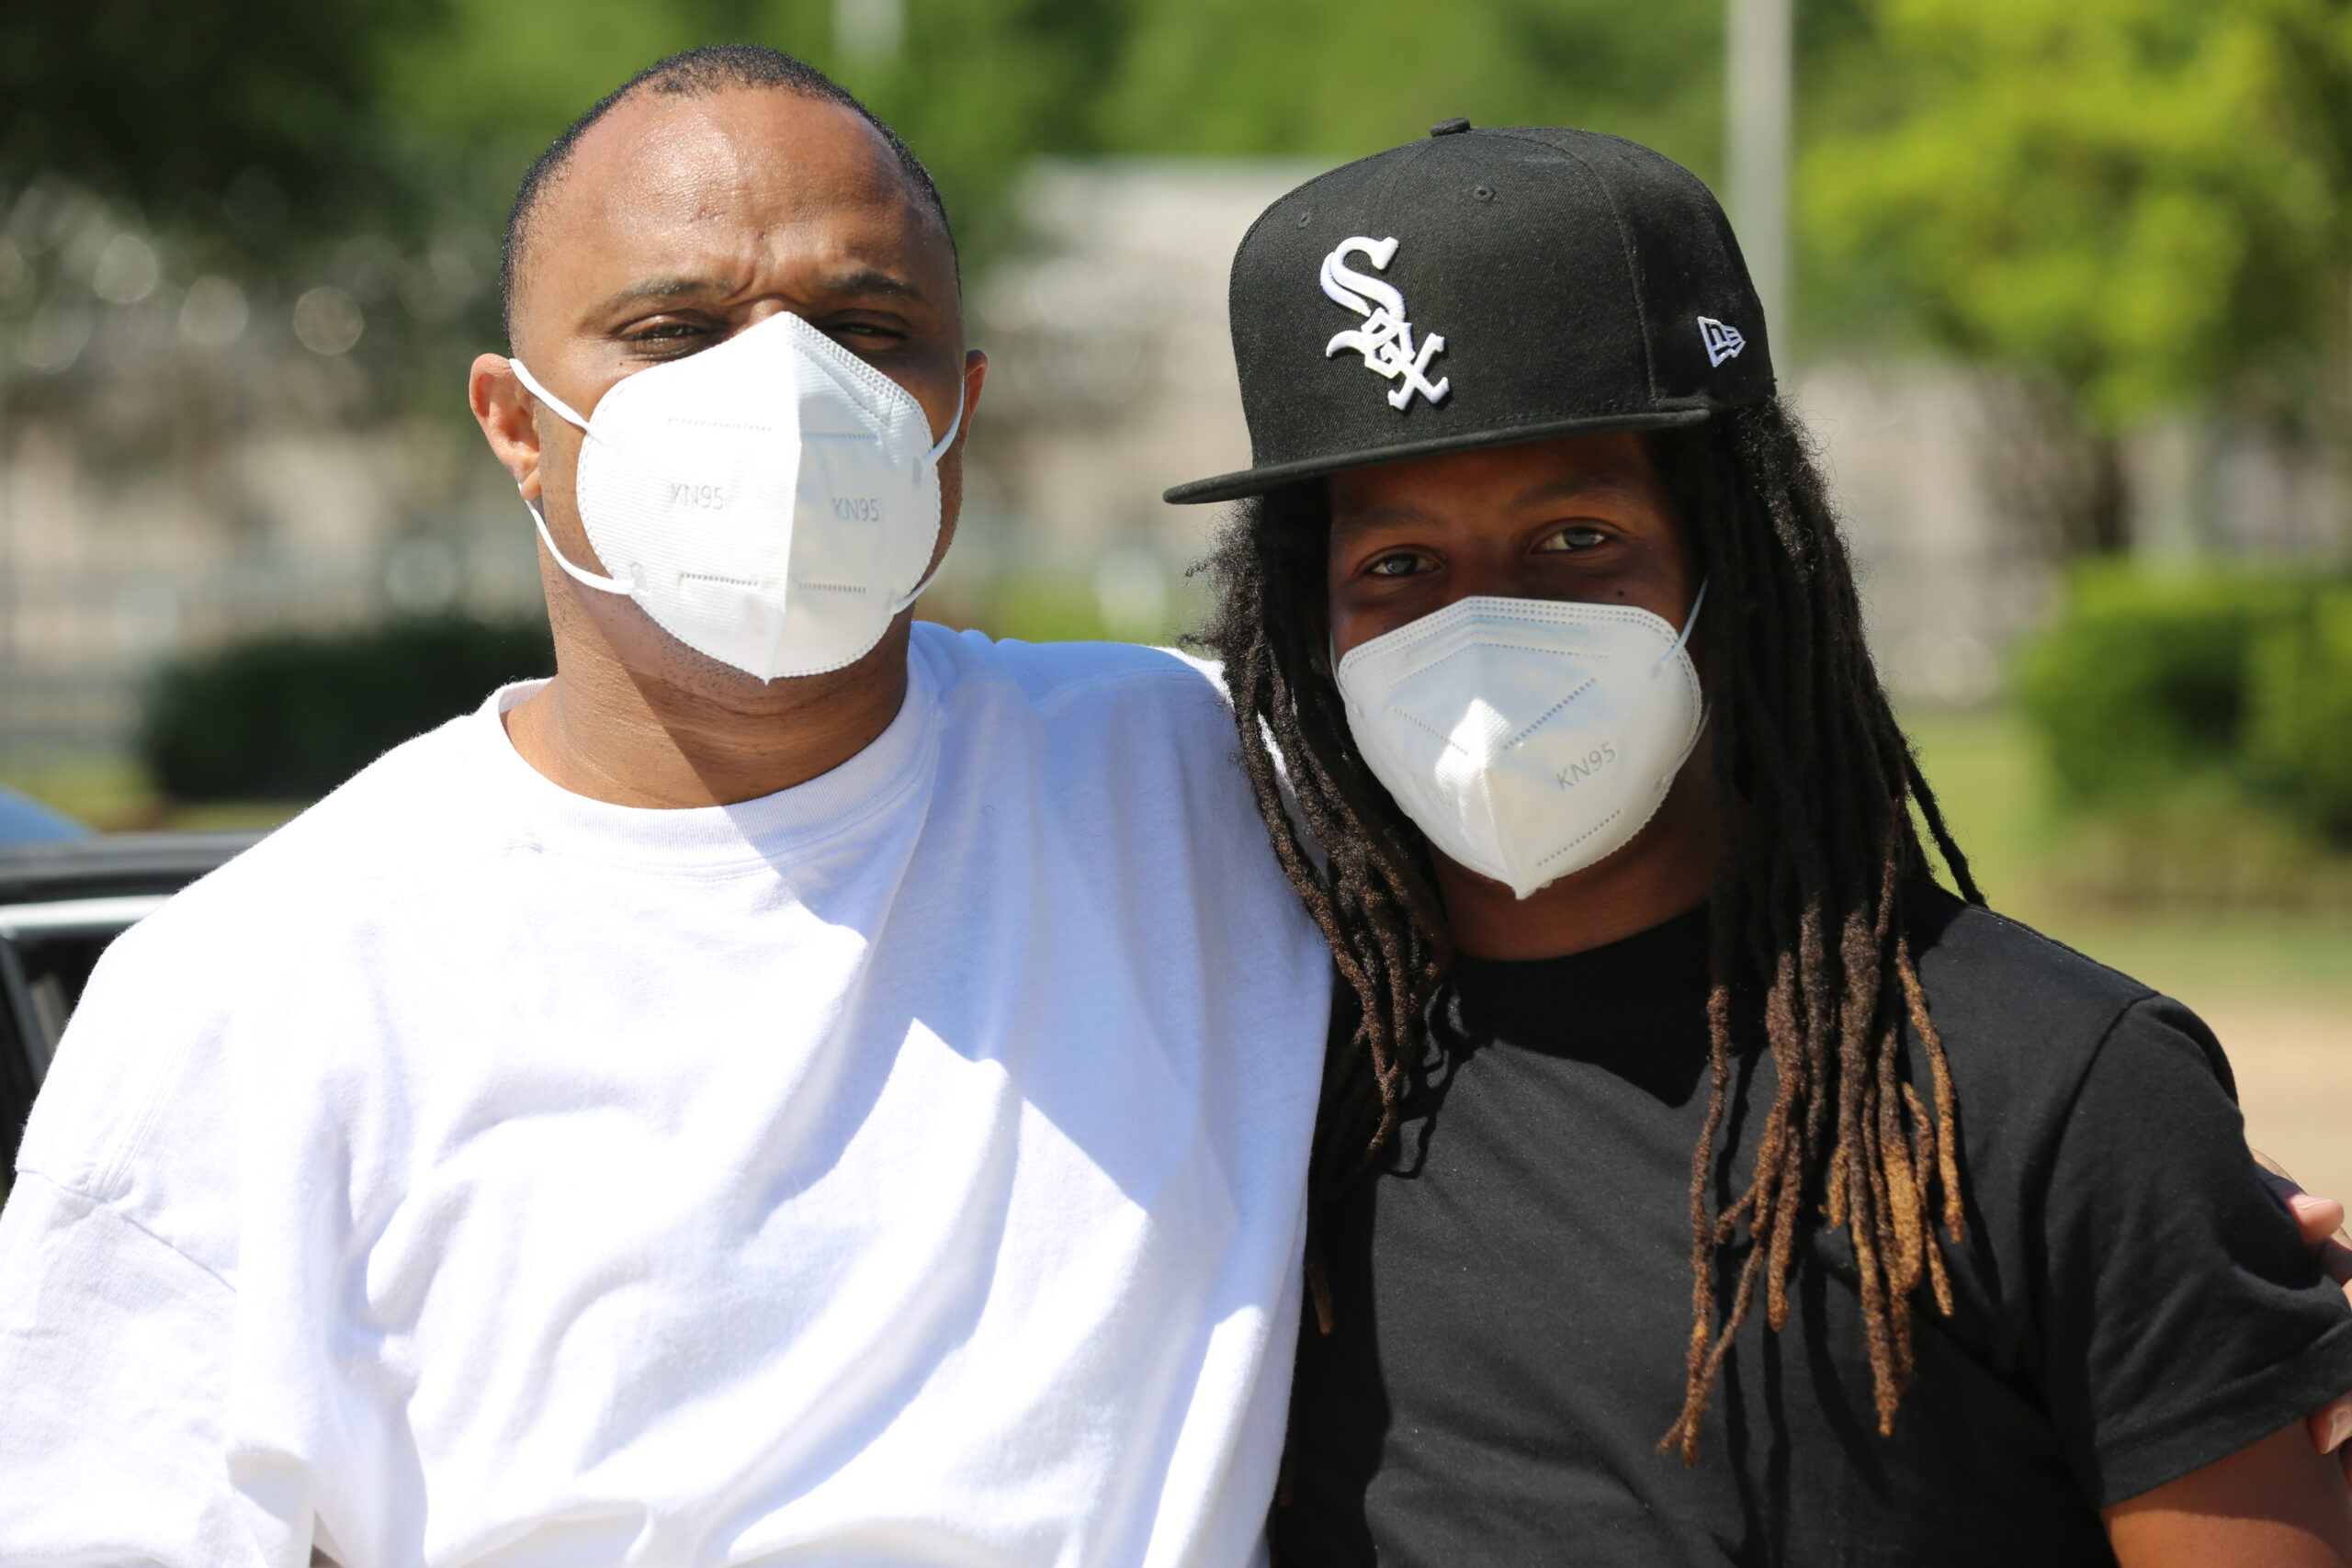 Darrill Henry poses with his son, Darrill Jr., after his release on May 7, 2020. (Image: David S. White/Innocence Project)